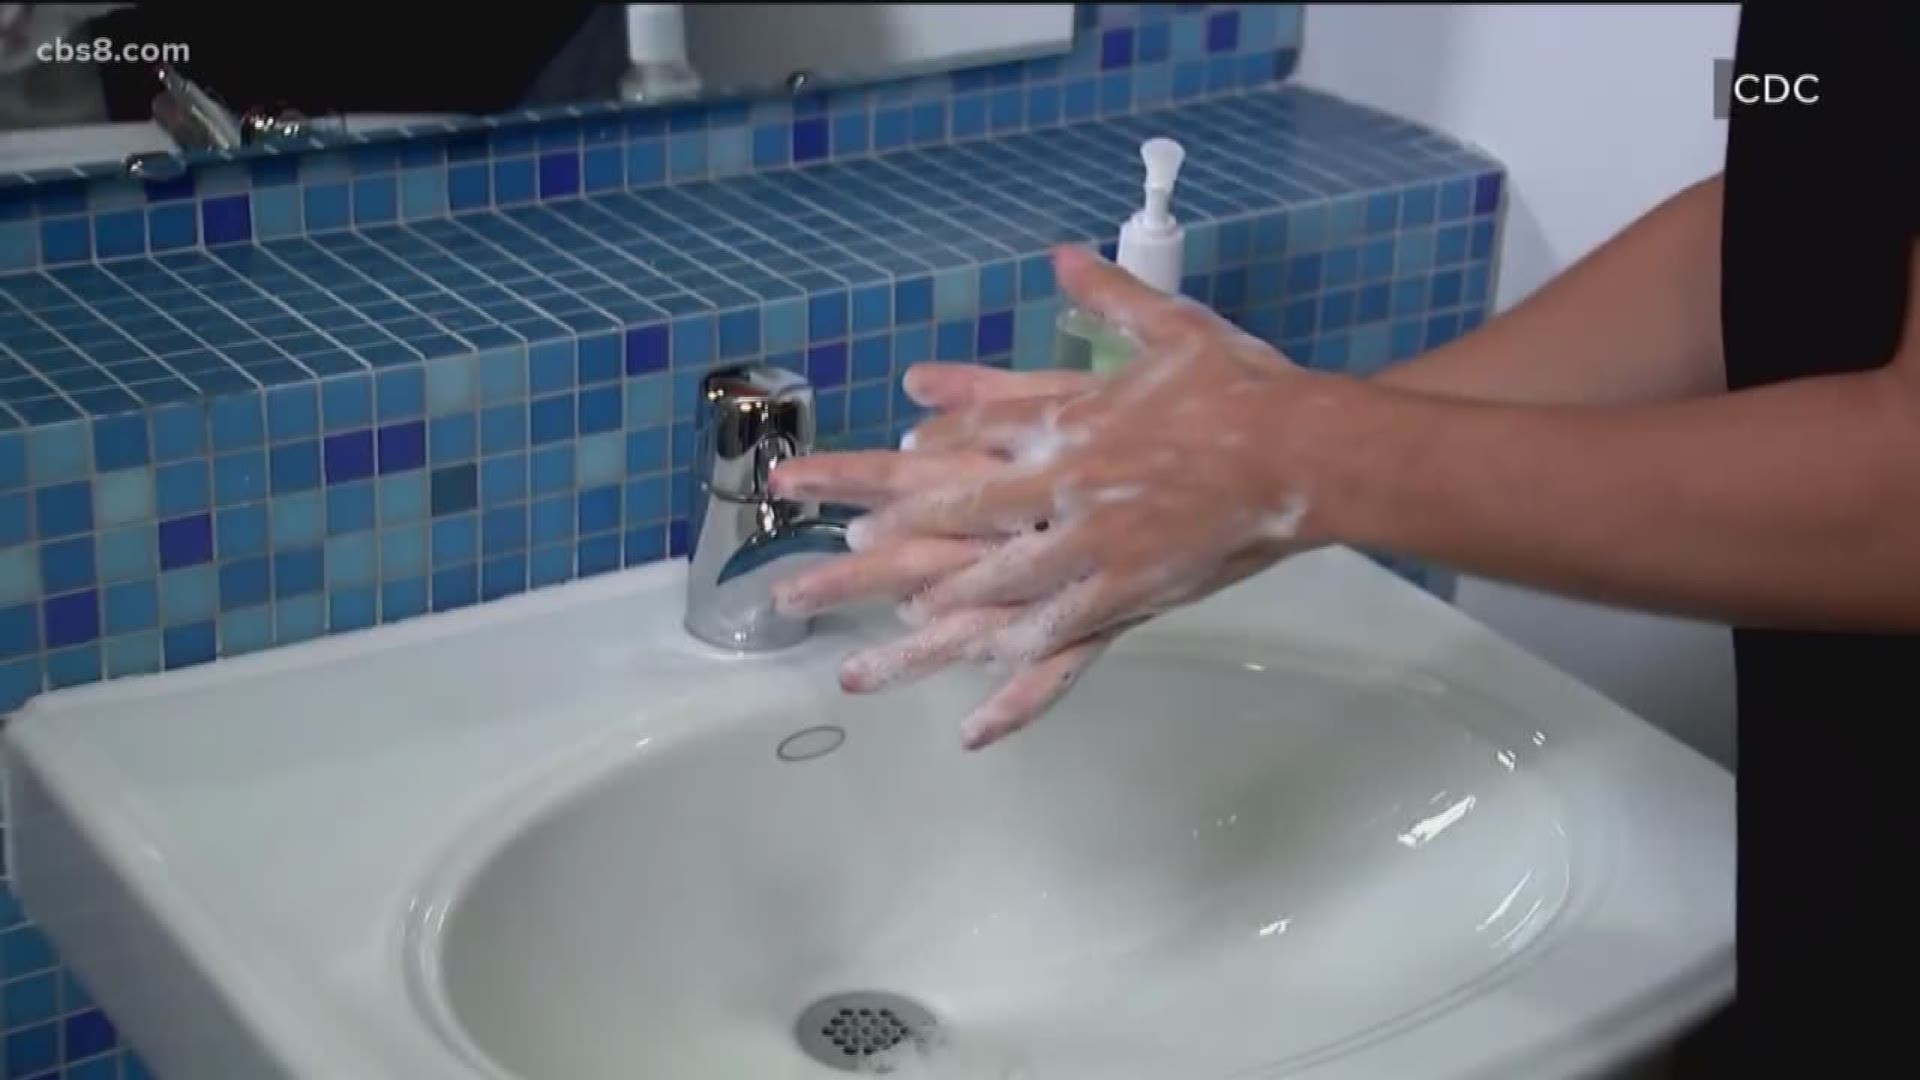 Experts recommend you wash your hands for at least 20 seconds.